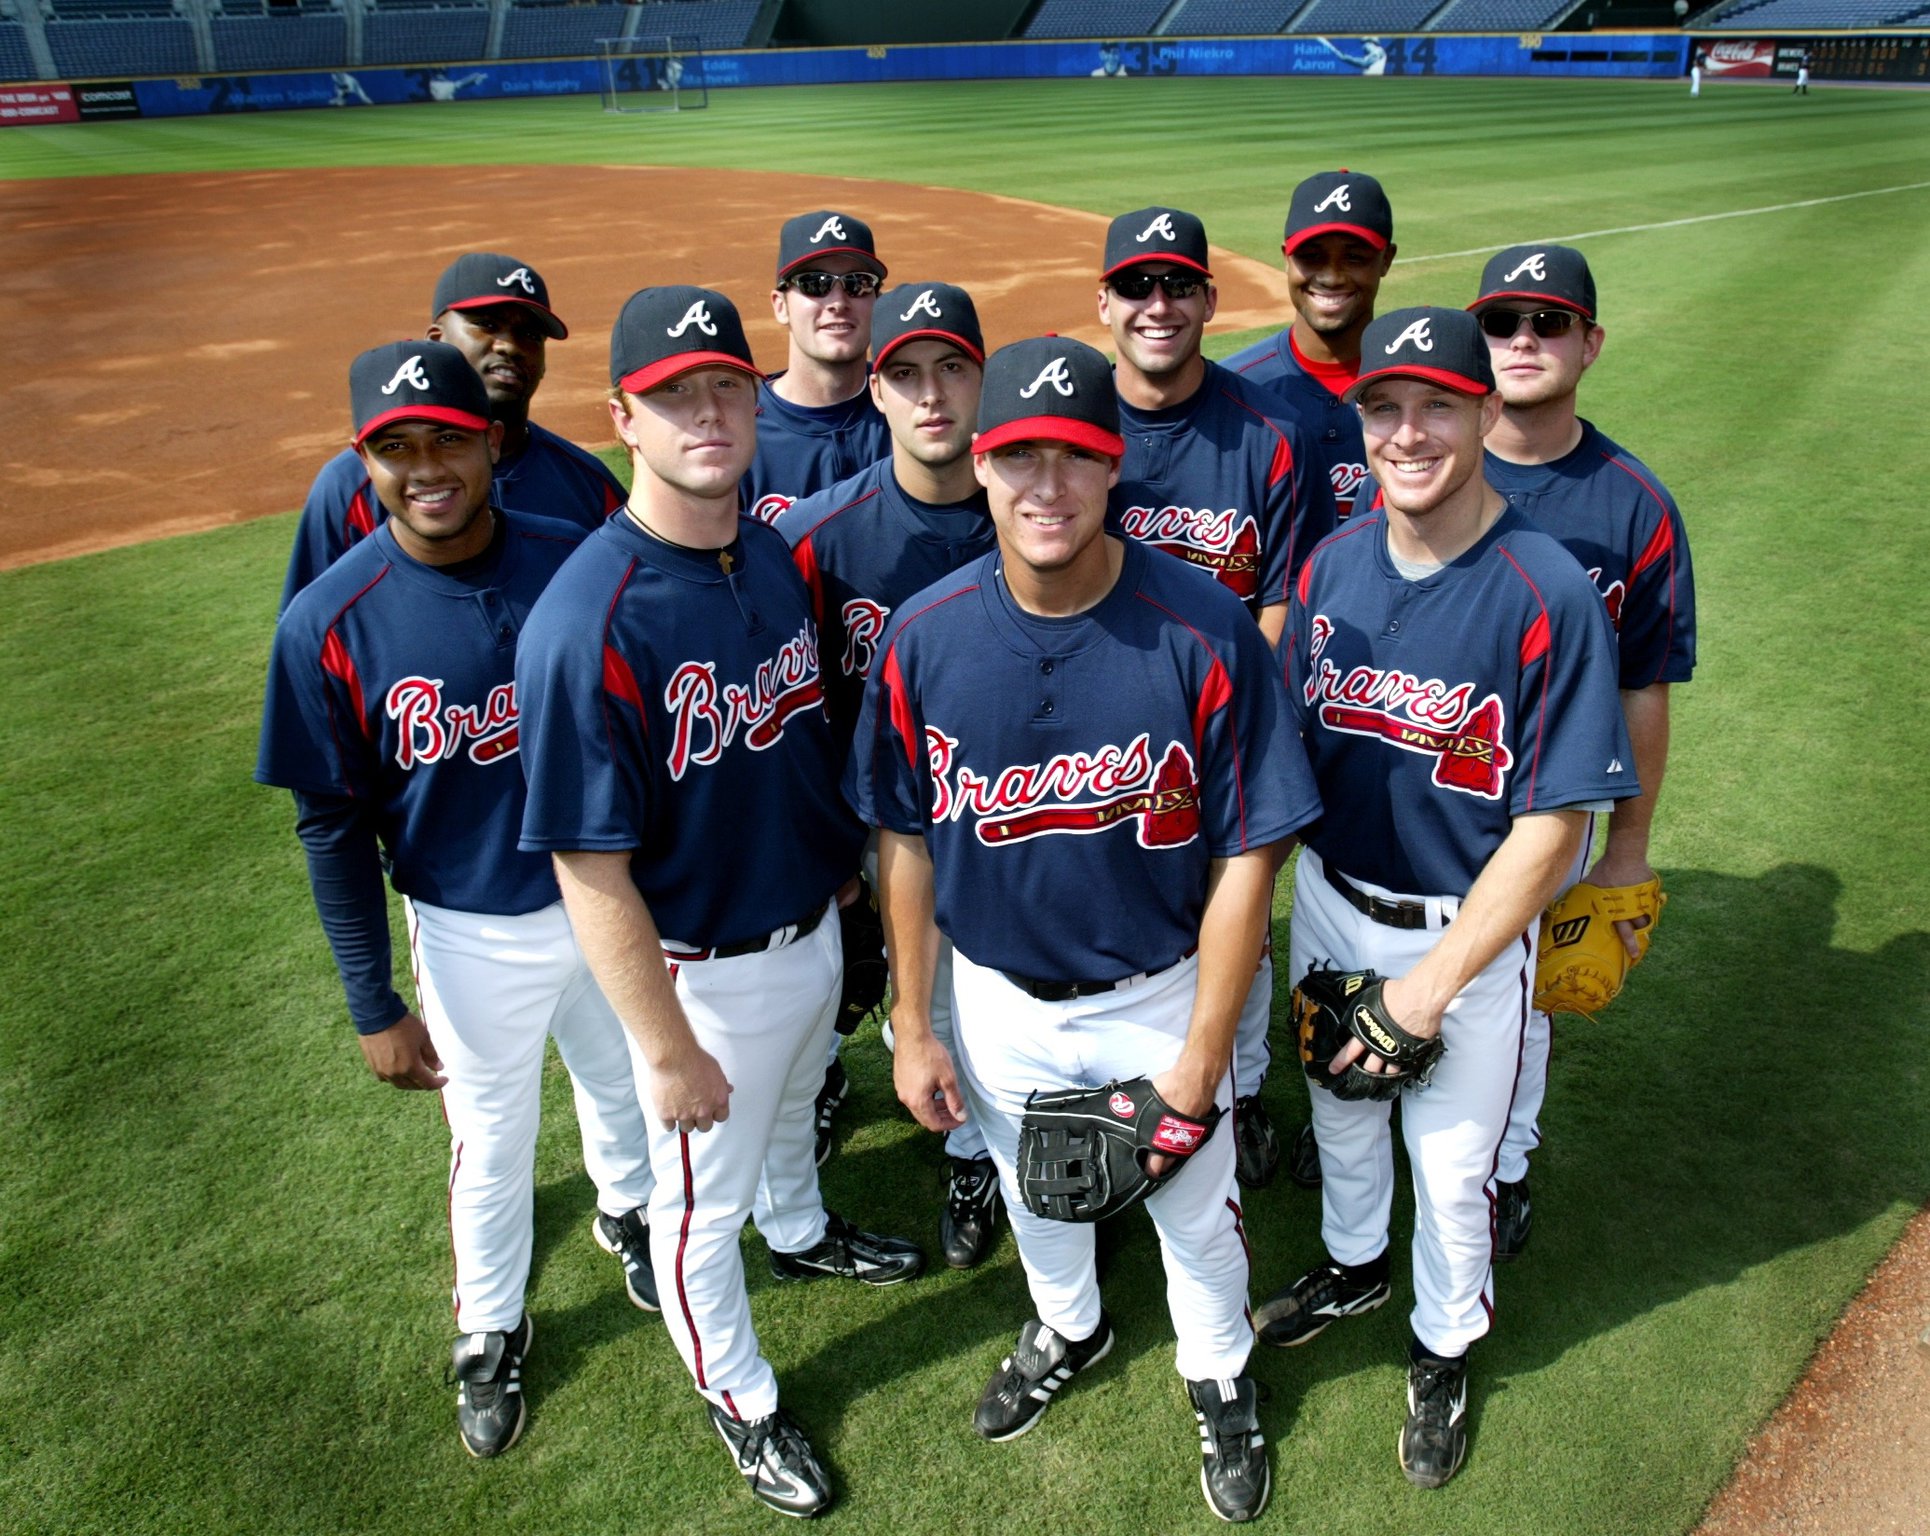 Catching up with the Baby Braves of the 2005 Atlanta Braves team pic